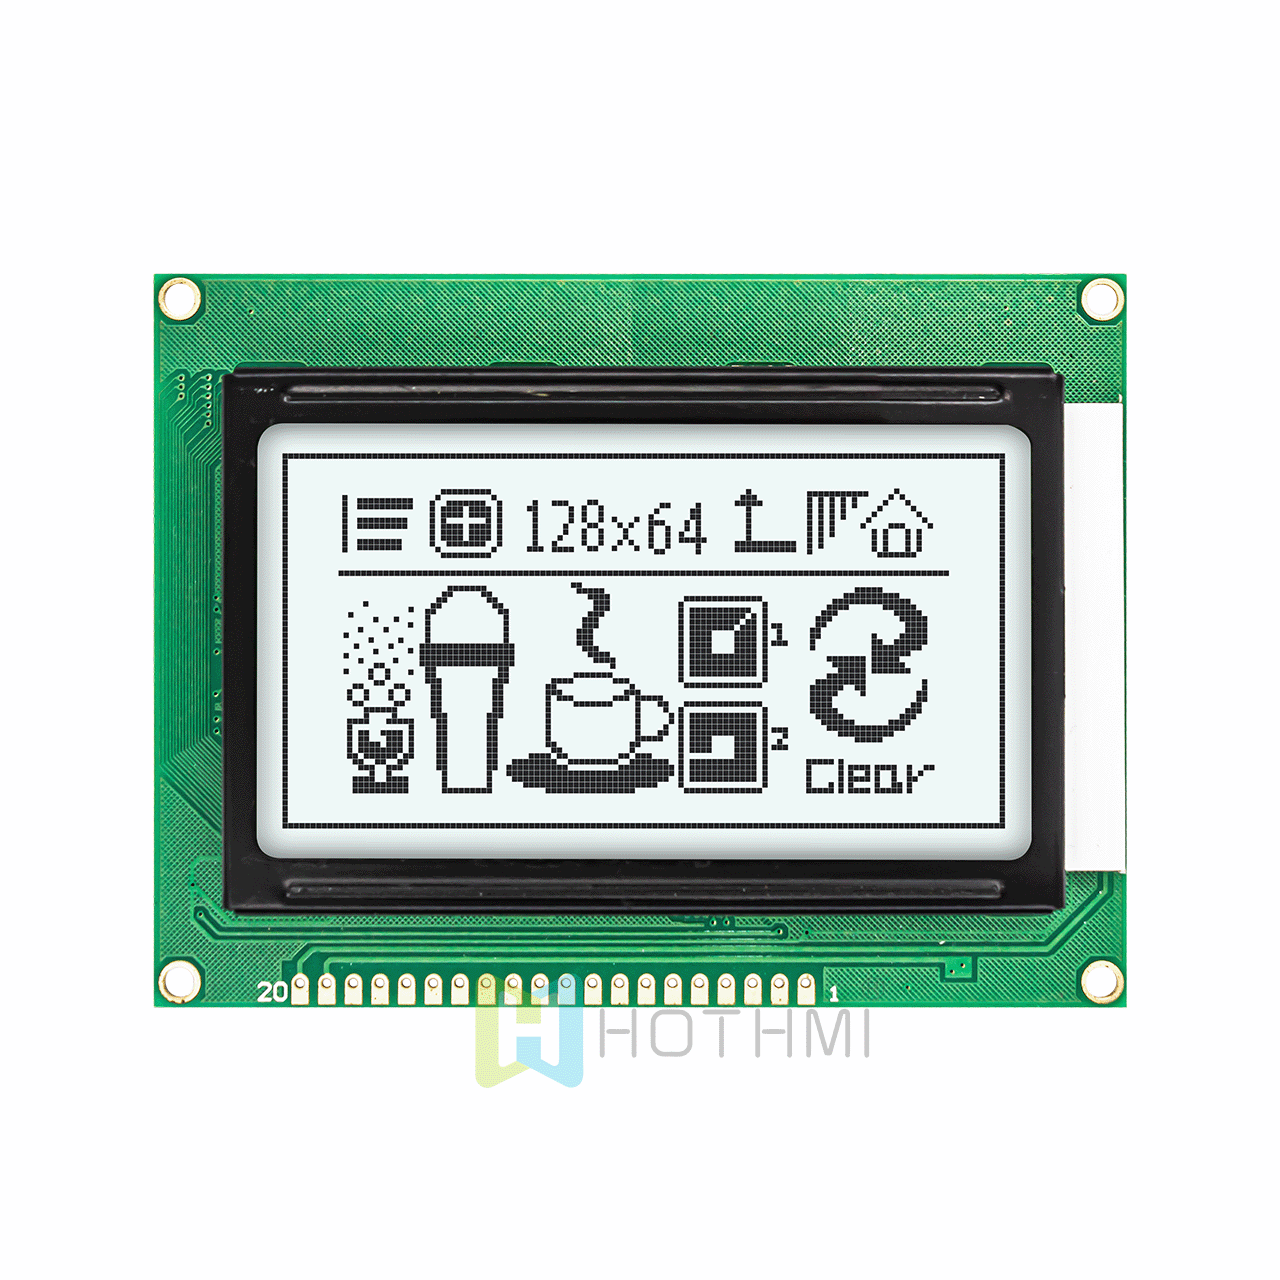 3.2-inch 128X64 monochrome graphic dot matrix module LCM/12864 LCD graphic display module/white background gray characters/ST7920 control chip